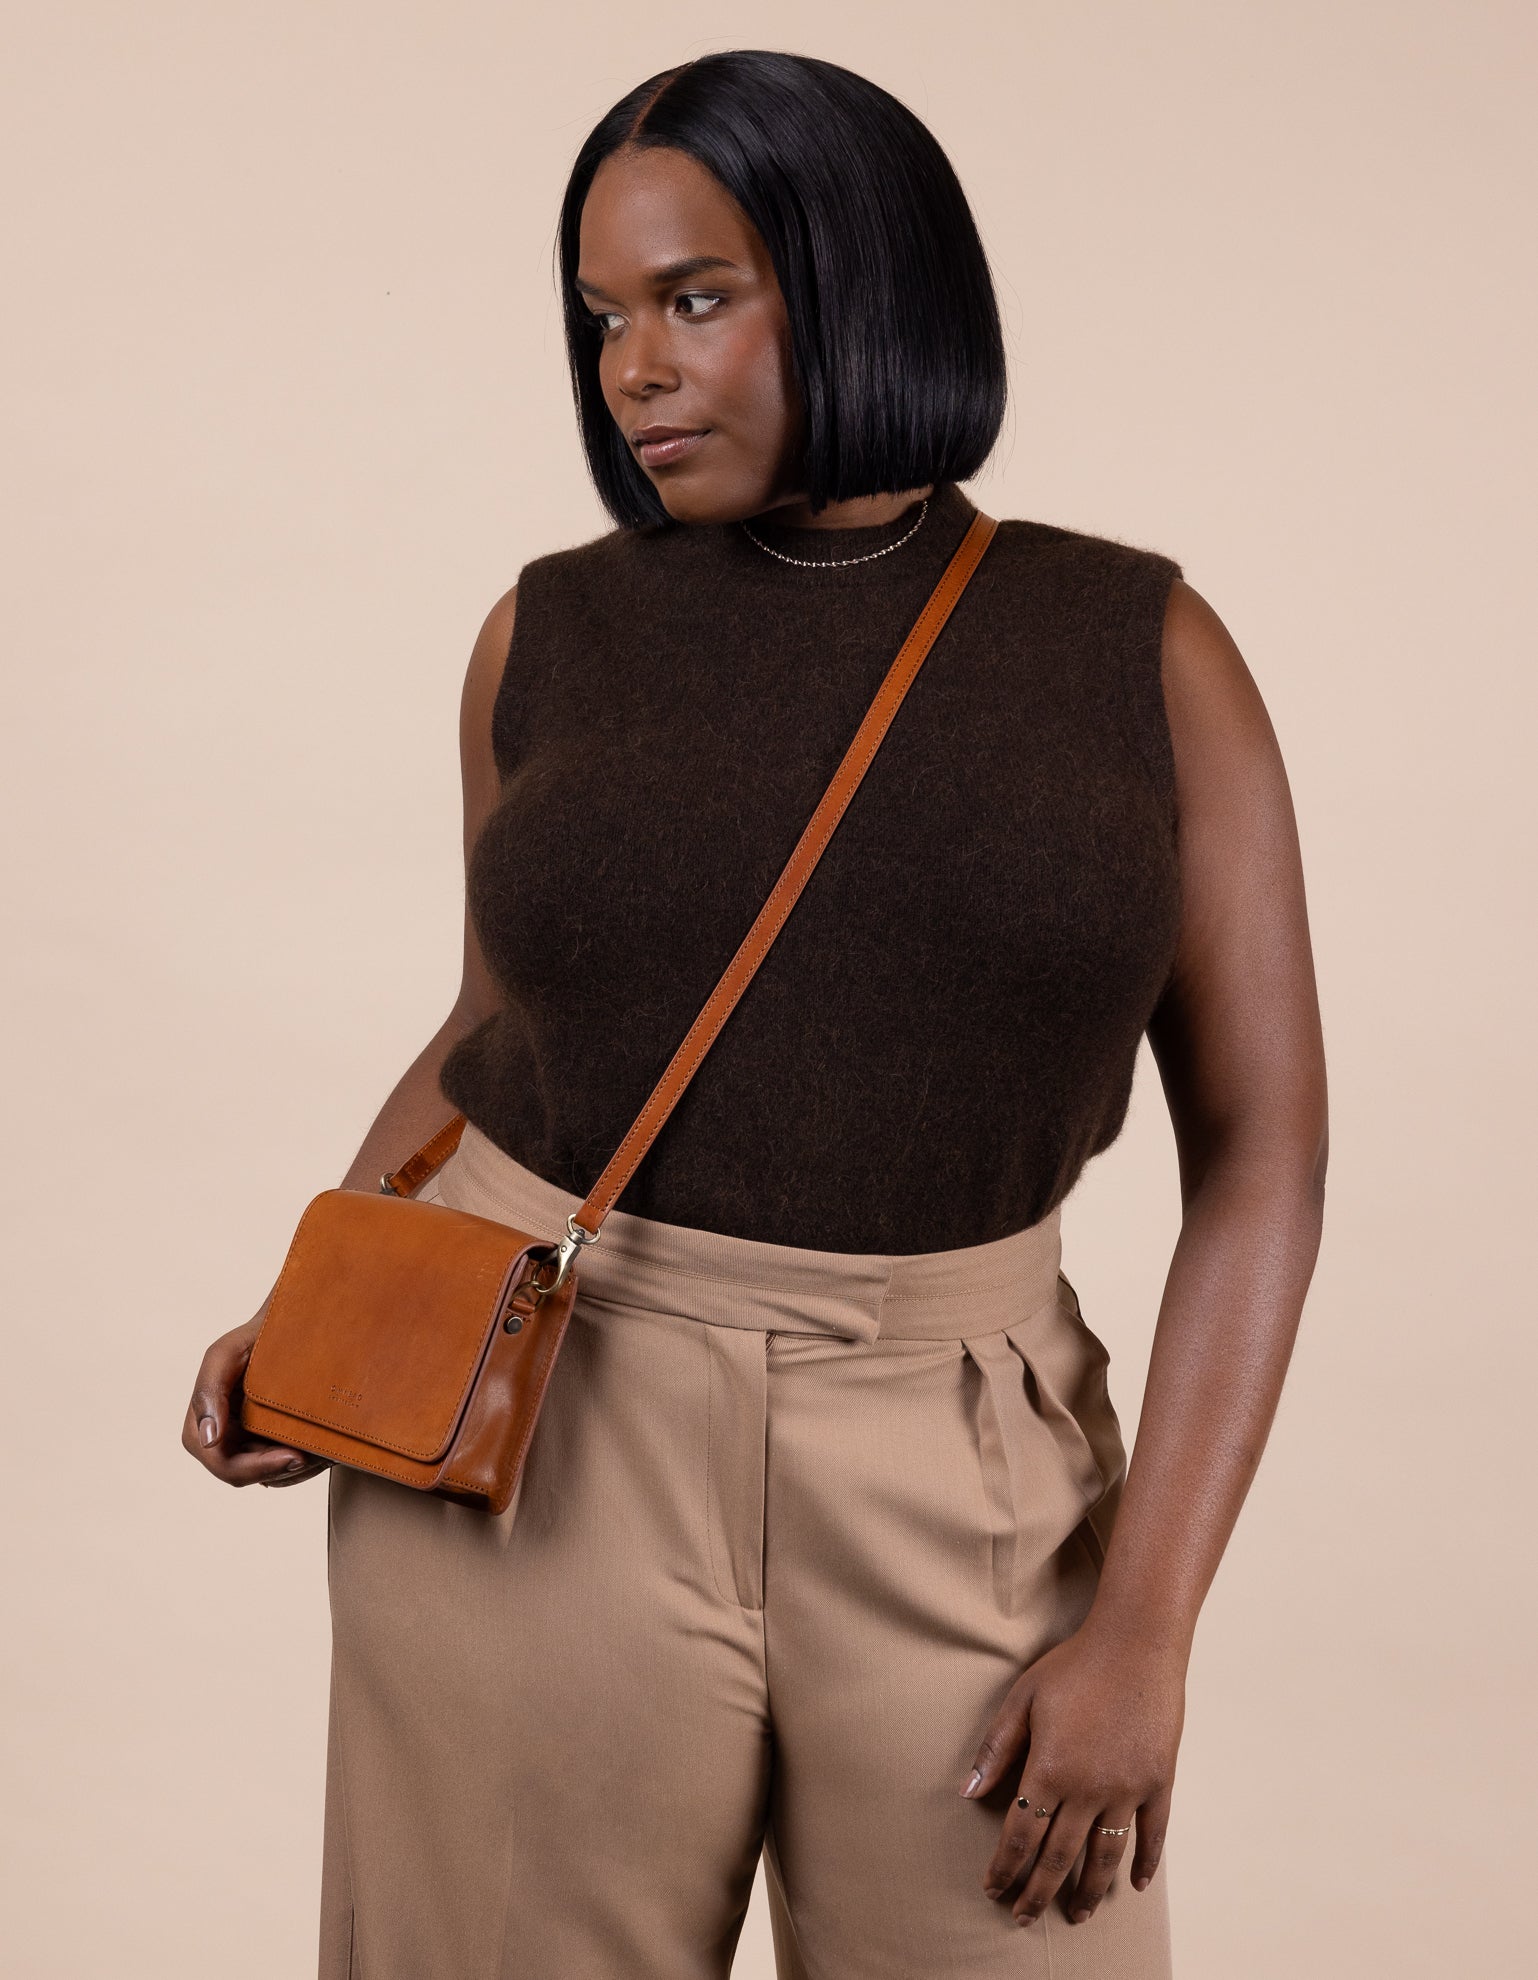 Audrey Mini Cognac leather bag. Square shape with an adjustable leather strap. Model image